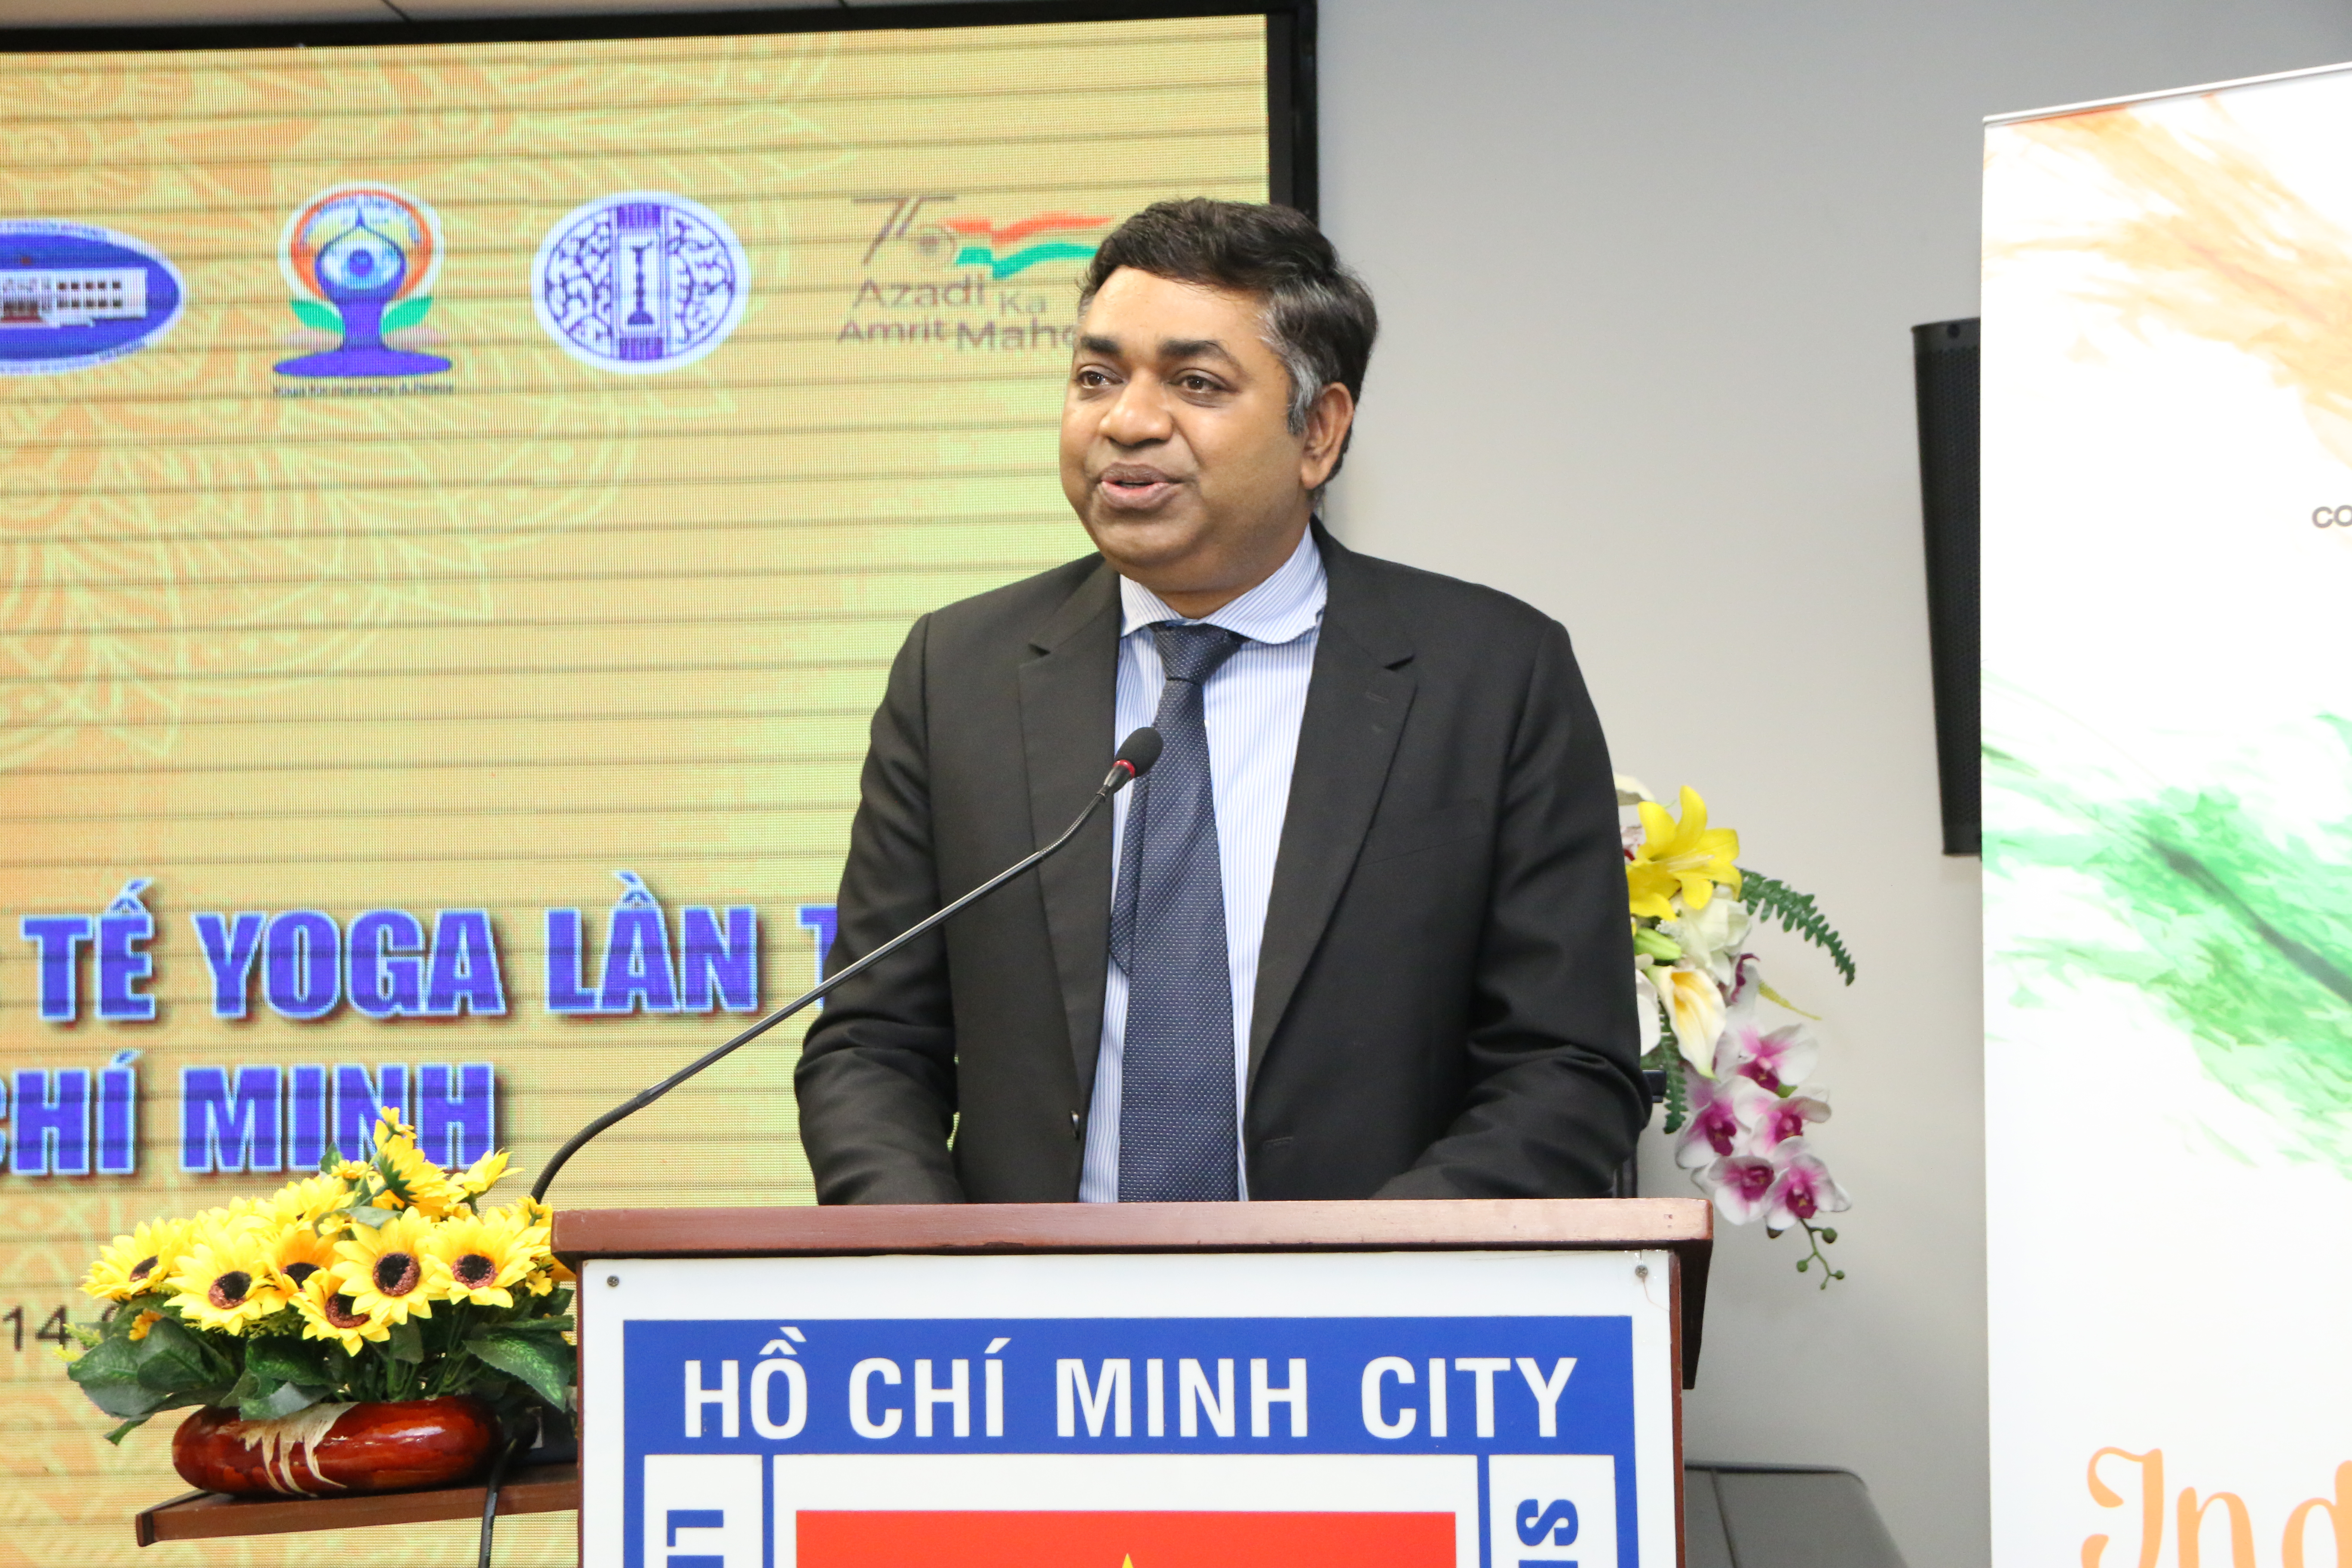 Consul General of India in Ho Chi Minh City Madan Mohan Sethi chairs the press conference to announce the 8th International Day of Yoga in Ho Chi Minh City and other provinces/cities in southern Vietnam at the conference hall of the Ho Chi Minh Union of Friendship Organizations on June 14, 2022. Photo courtesy of the Consulate General of India in Ho Chi Minh City